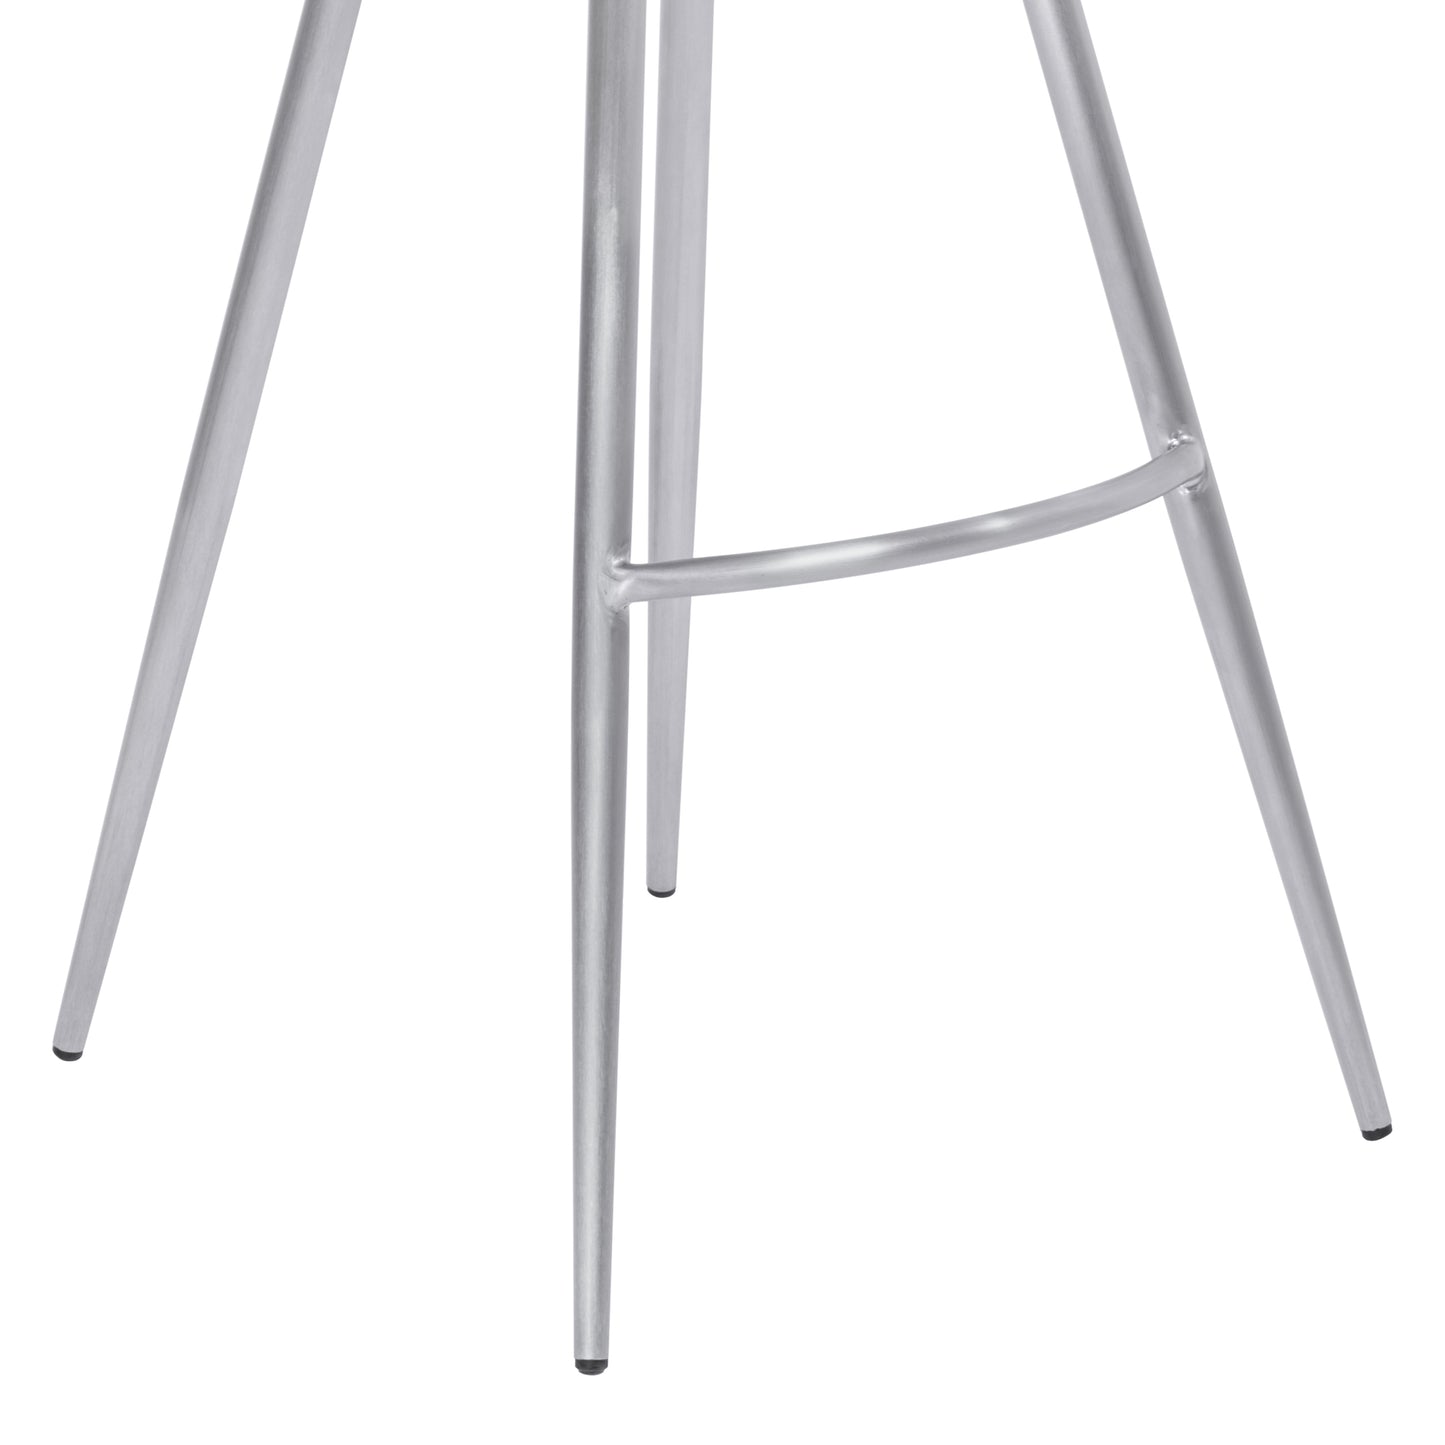 Zurich 26" Counter Height Metal Barstool in Vintage Gray Faux Leather with Brushed Stainless Steel Finish